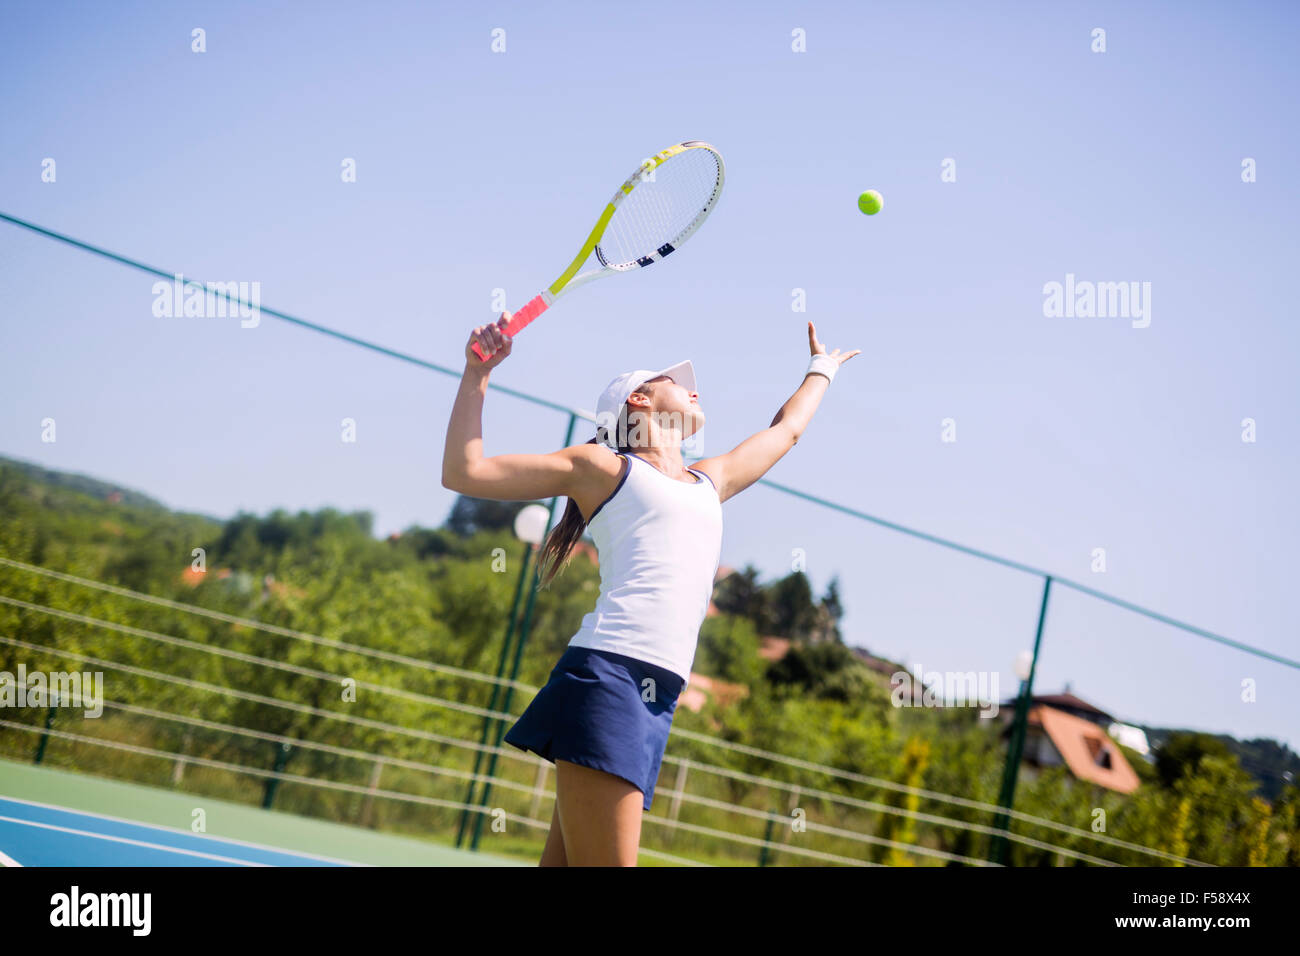 Beautiful female tennis player serving outdoor Stock Photo